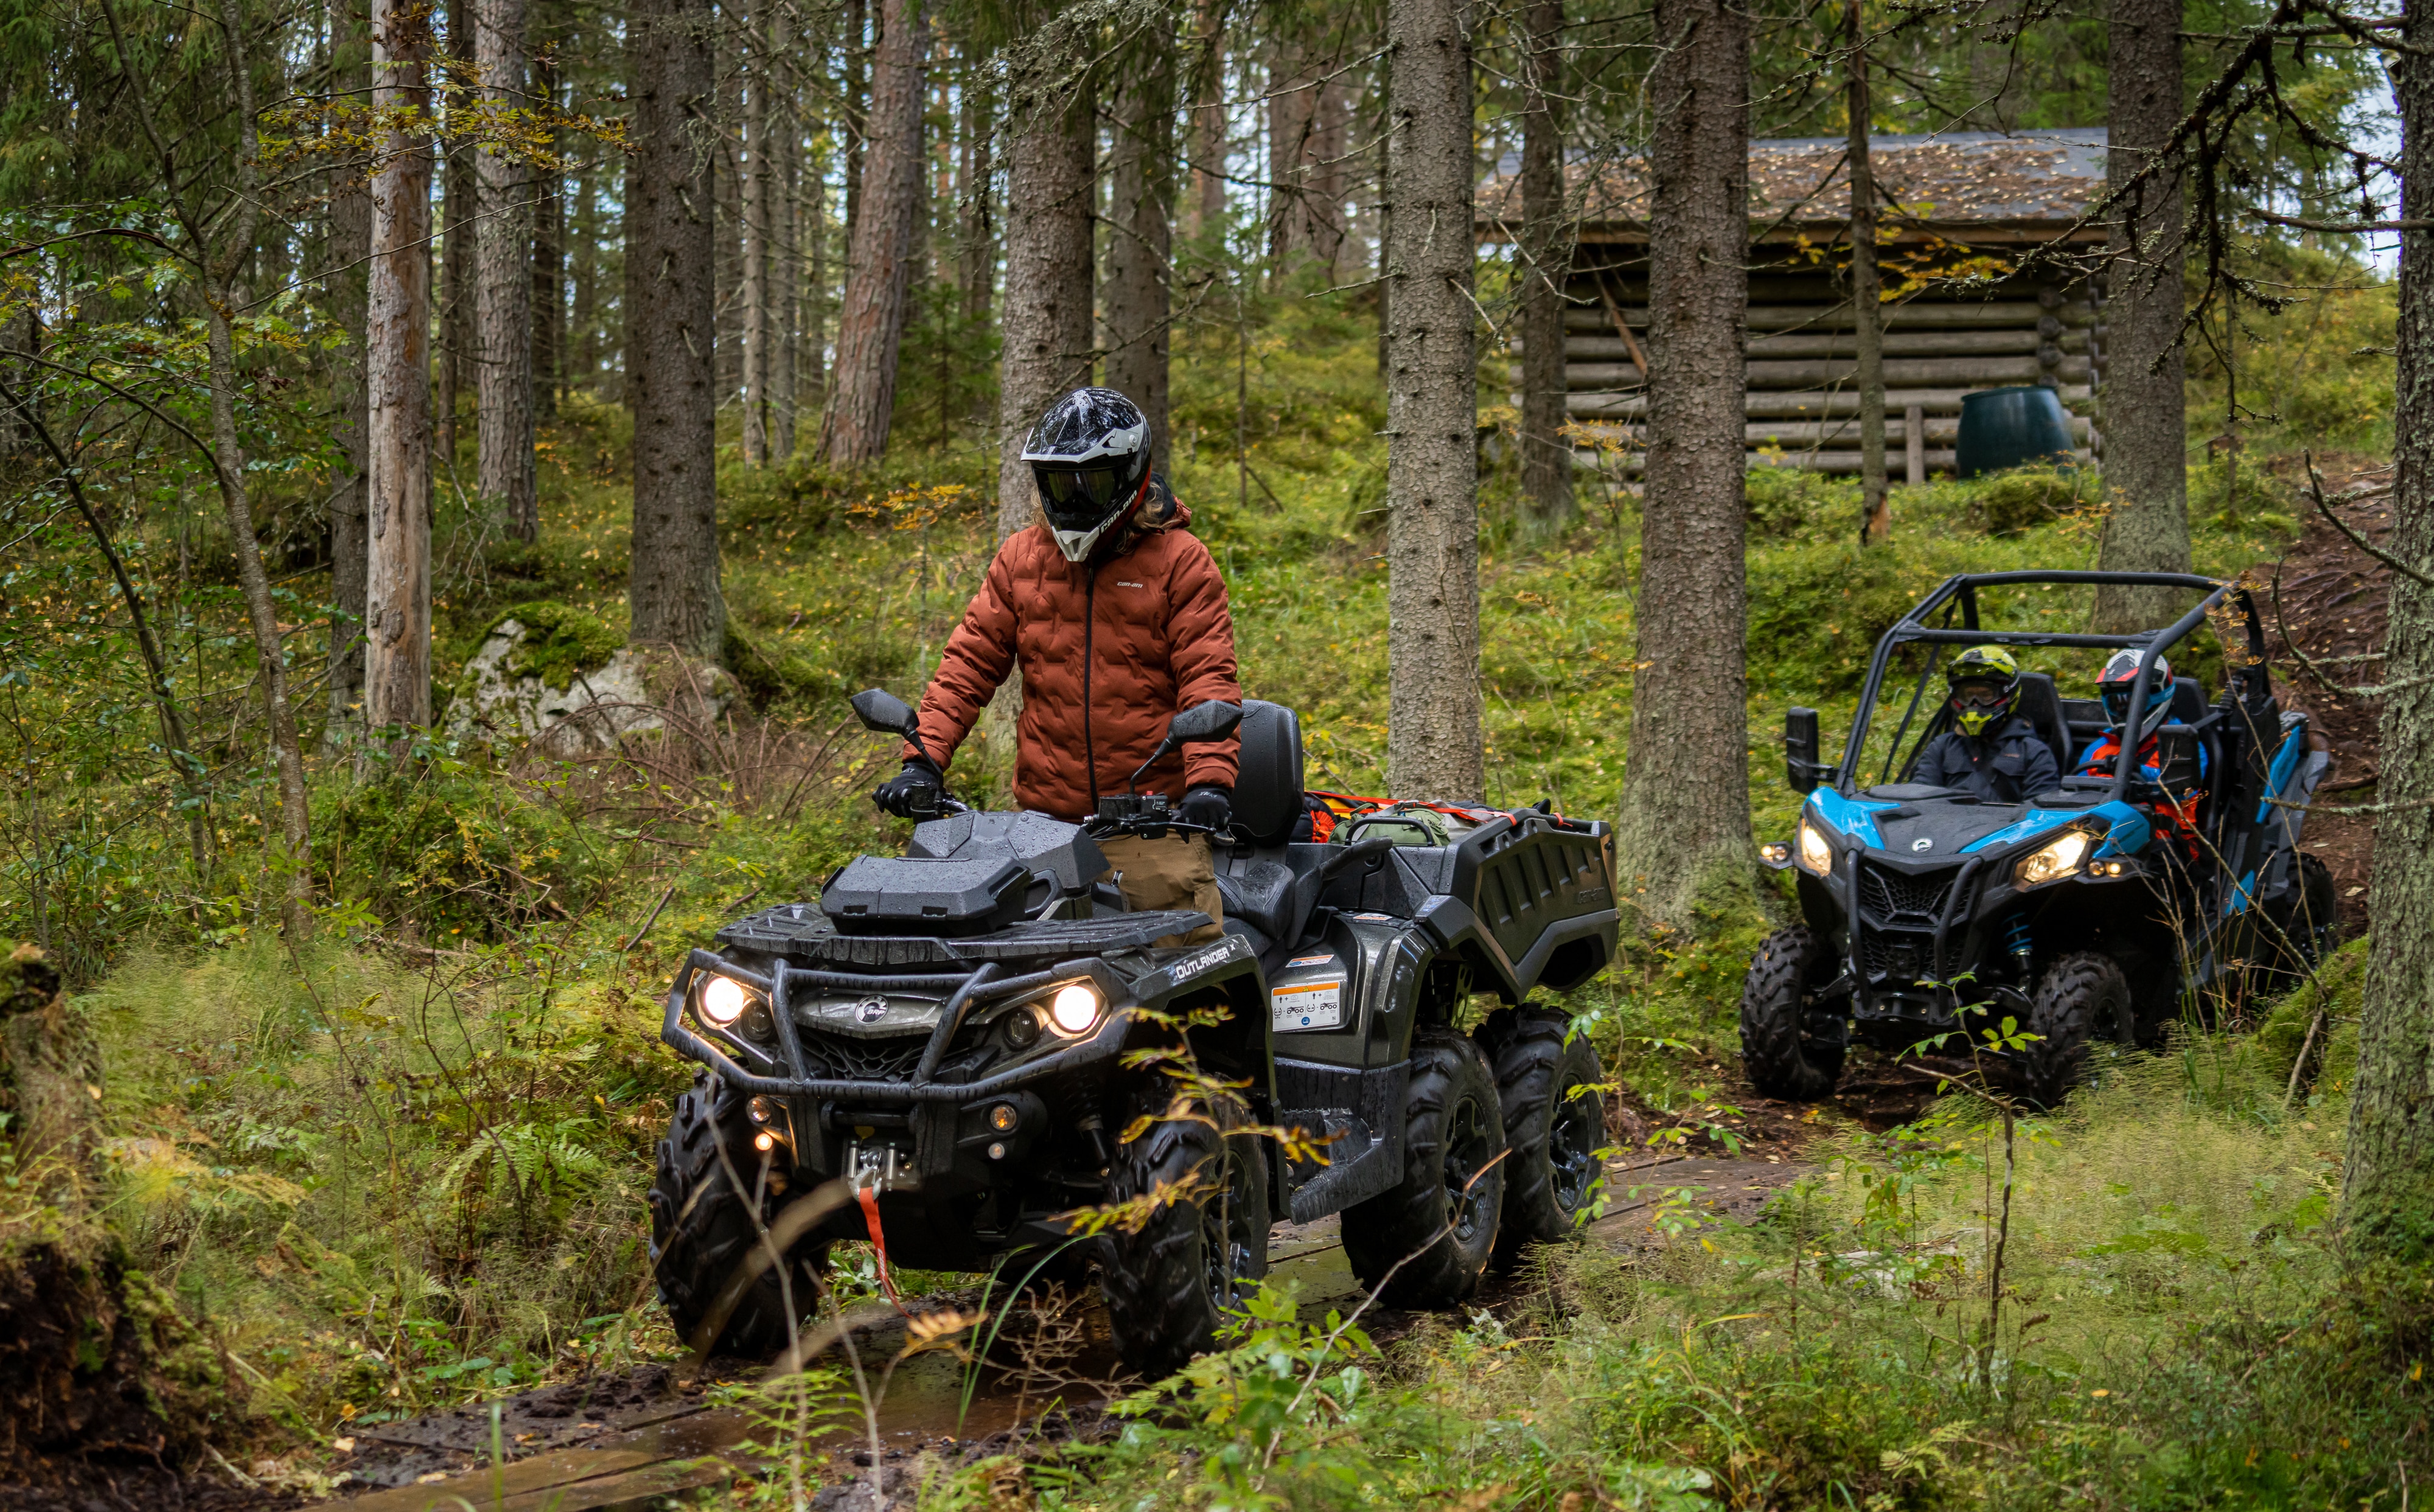 How do I ride my SSV or ATV on different types of terrain?